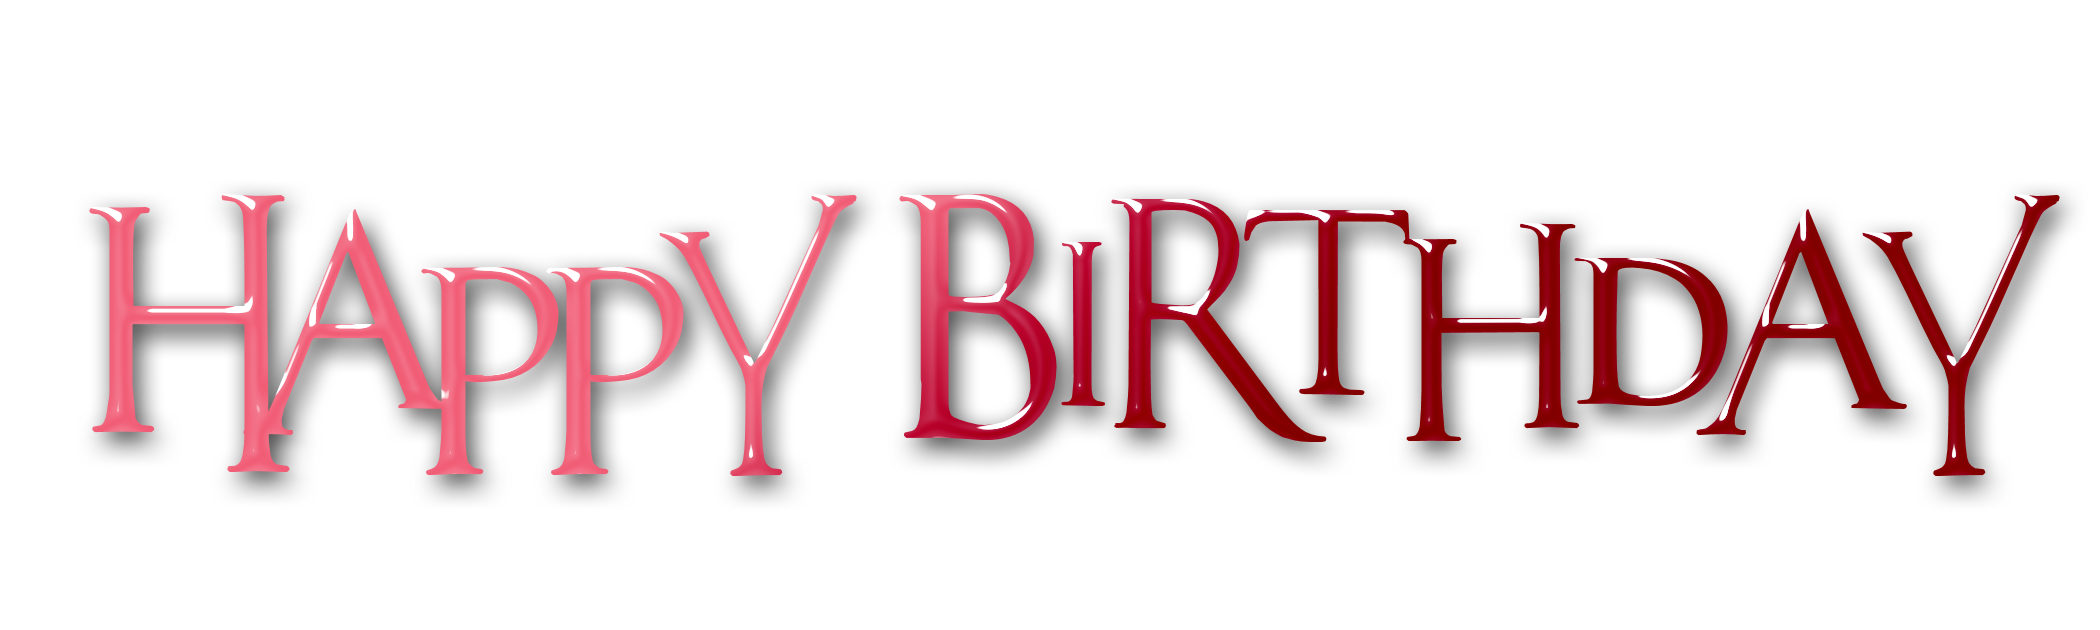 Happy Birthday Free Images Download Png Transparent Background Free Download Freeiconspng